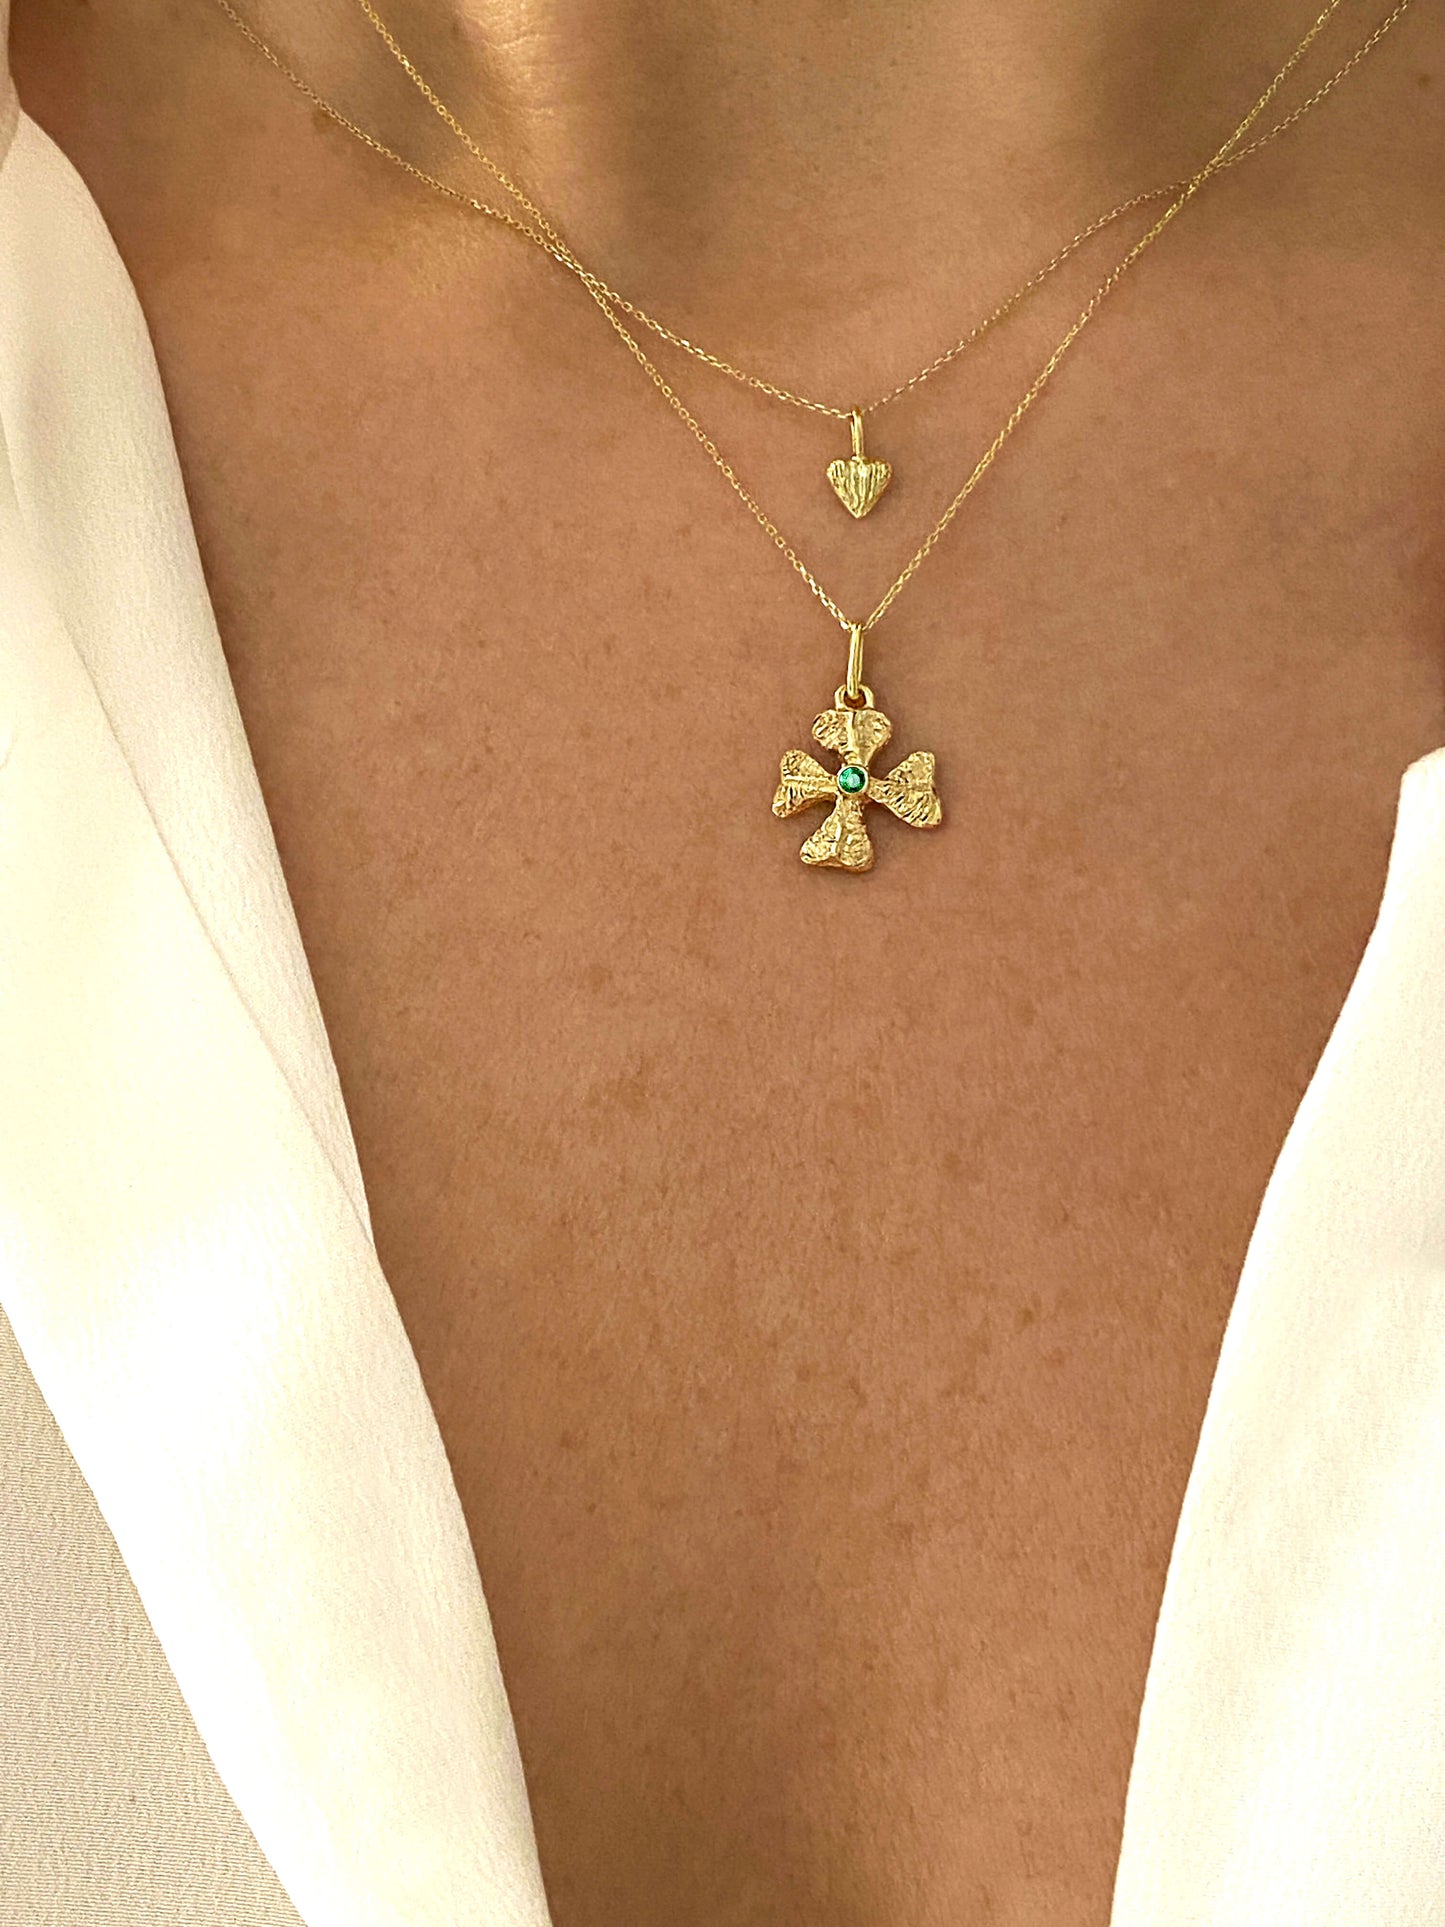 Necklace - Happiness Clover / M